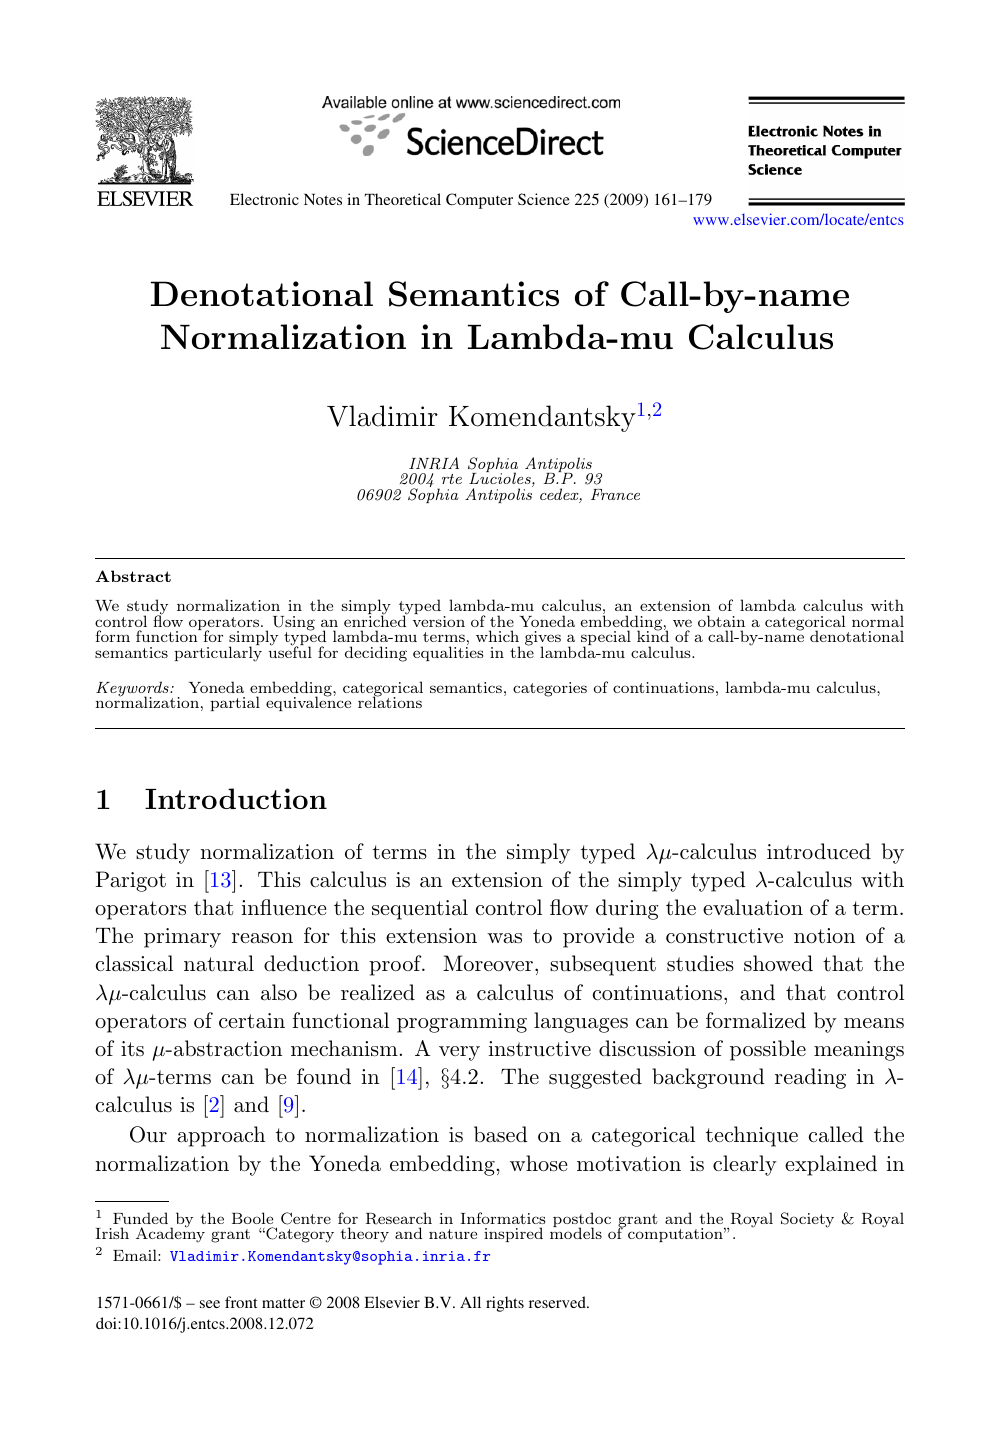 Denotational Semantics Of Call By Name Normalization In Lambda Mu Calculus Topic Of Research Paper In Computer And Information Sciences Download Scholarly Article Pdf And Read For Free On Cyberleninka Open Science Hub